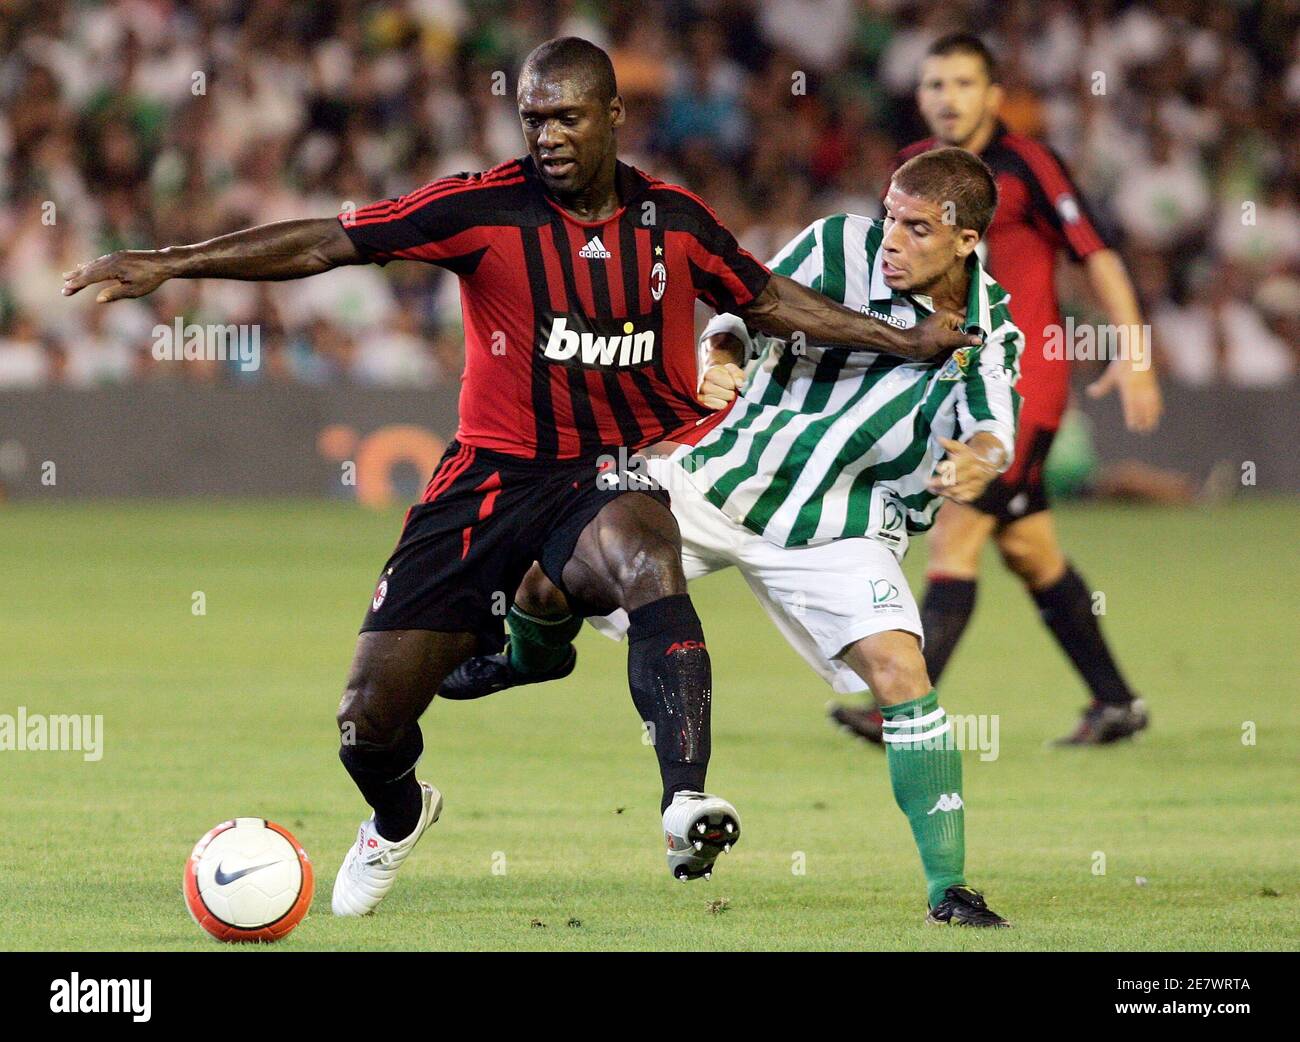 Real Betis' Alberto Rivera Pizarro (R) fights for the ball with AC Milan's  Clarence Seedorf during their friendly soccer match at Real Betis' Manuel  Ruiz de Lopera stadium in Seville August 9,